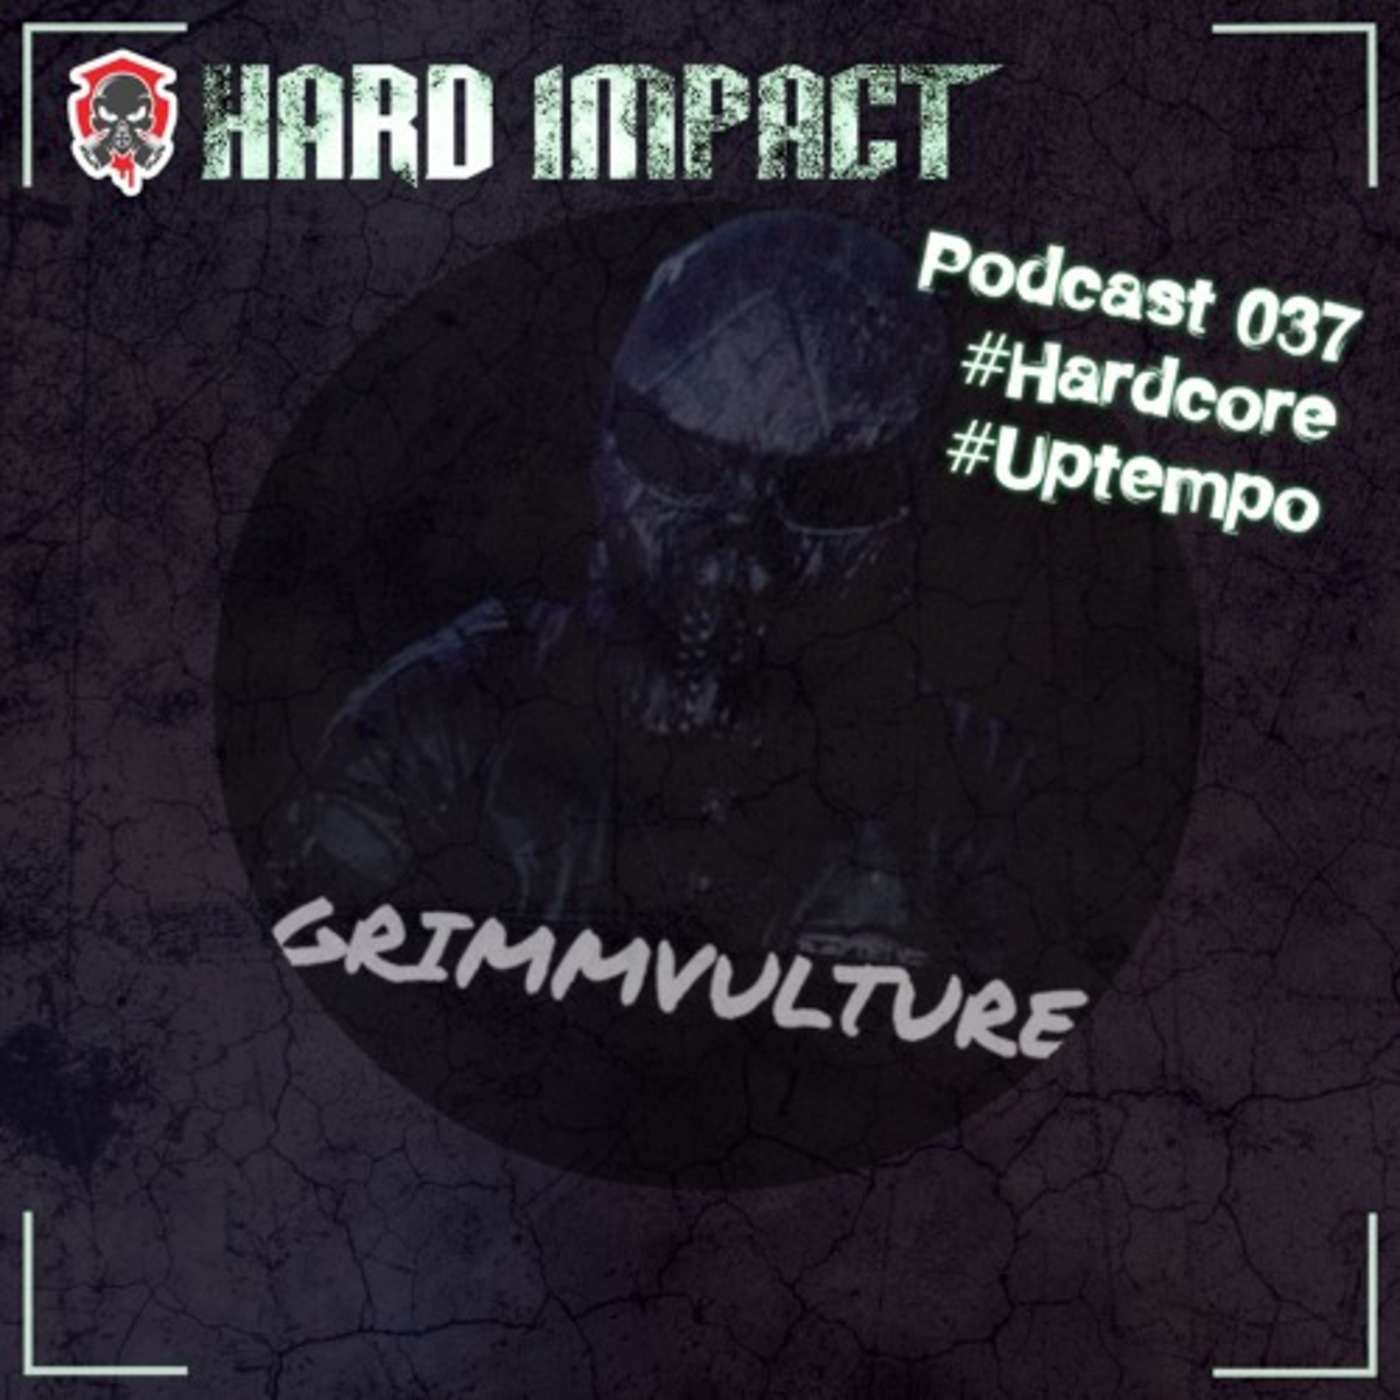 Hardcore/Uptempo Mix | by GrimmVulture | September 2021 | Hard Impact